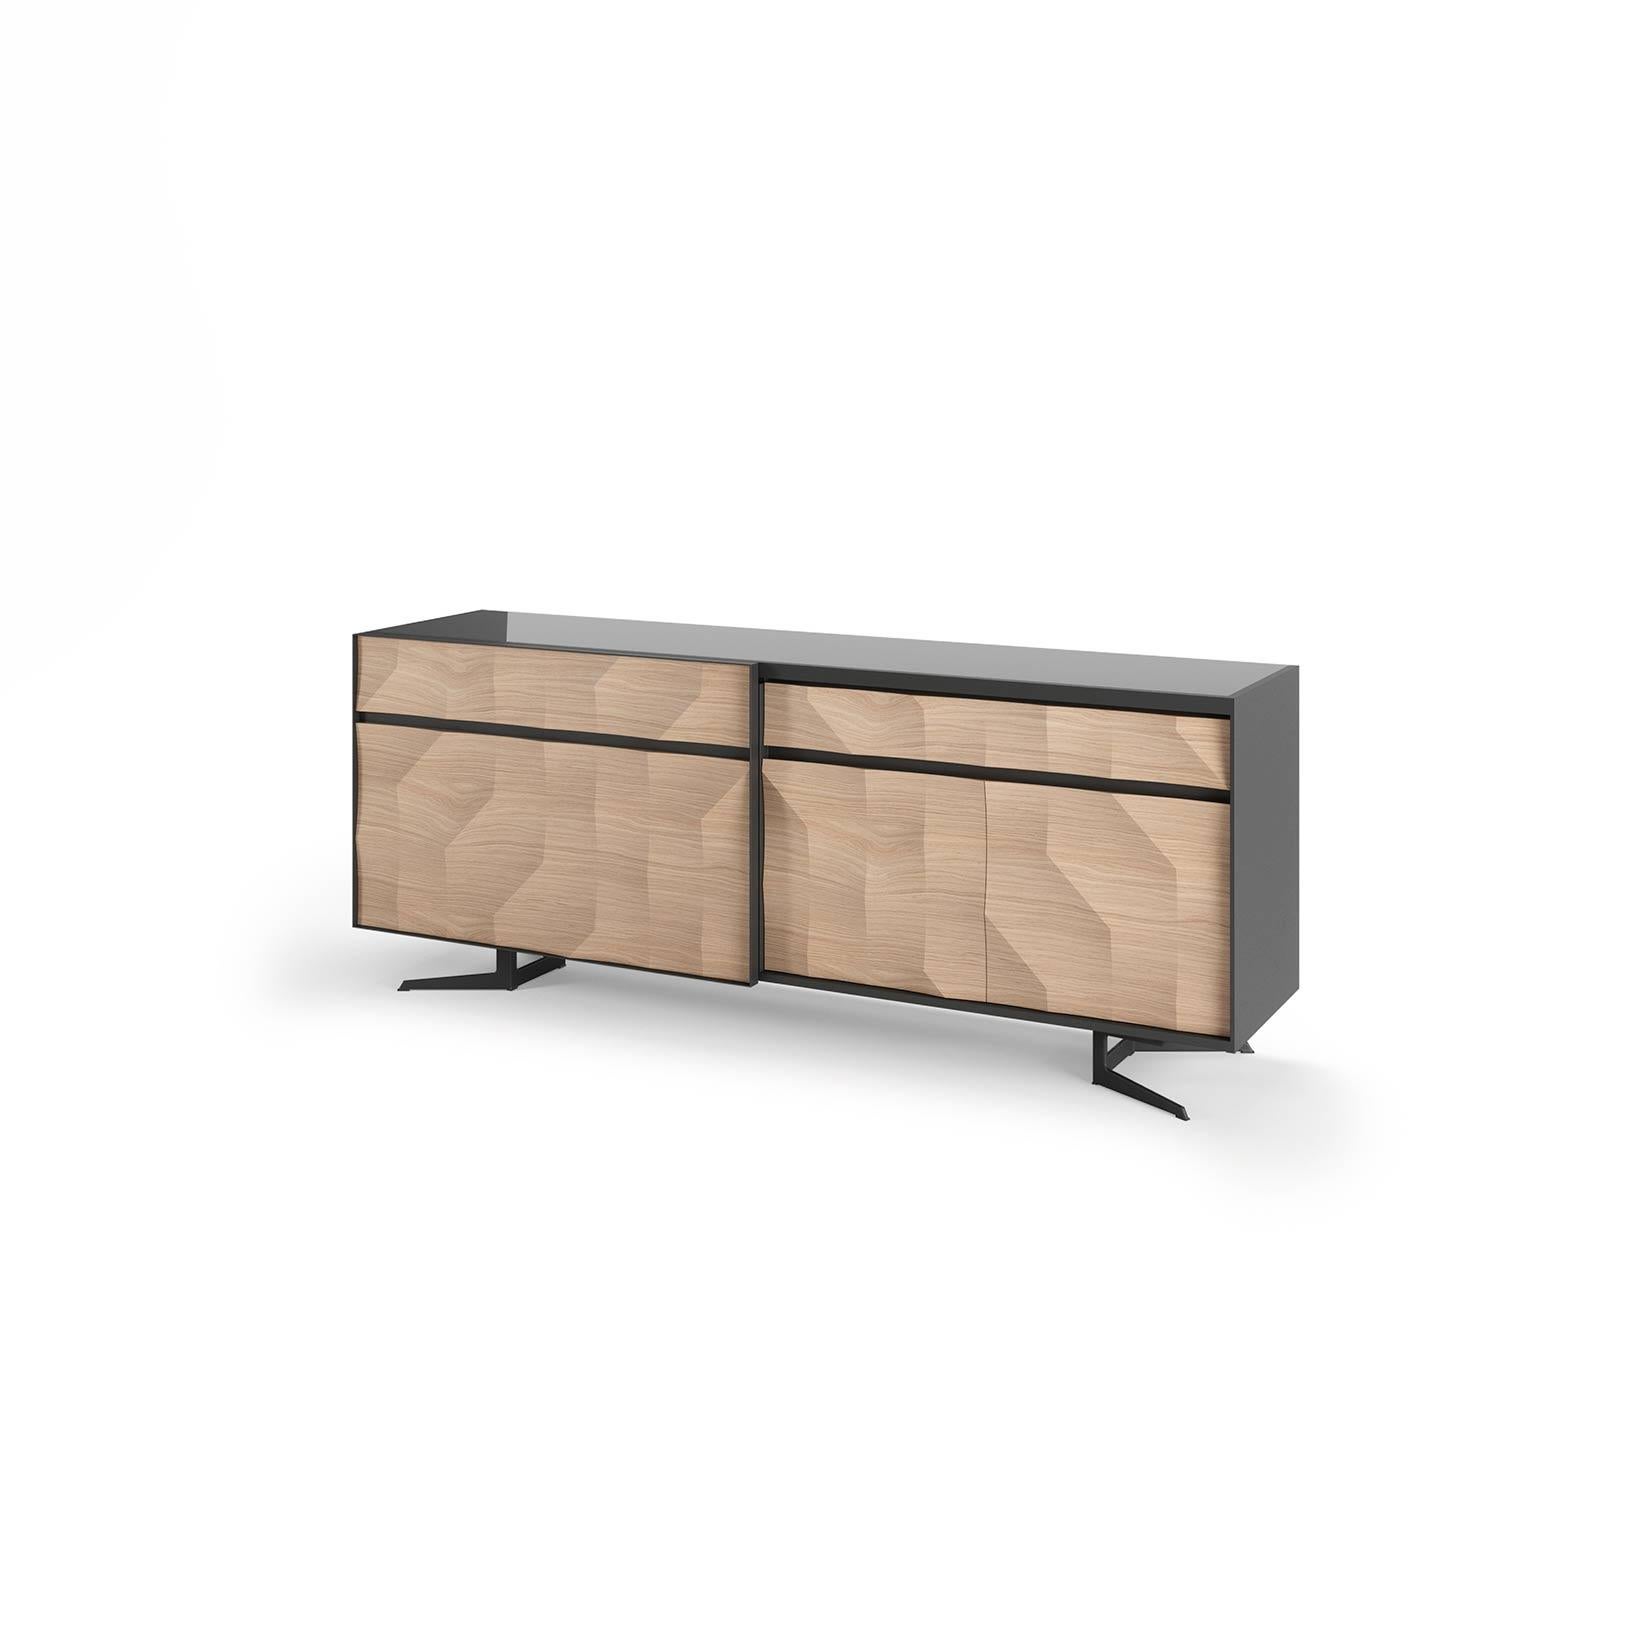 *Collection not sold in France, exclusive to Mobilier de France.*

Monte Carlo Sideboard w/ 3 Doors and 1 Drawer w/ Glass Top.

The MonteCarlo collection stands out for its modern and sober look, through the combination of soft and neutral colors